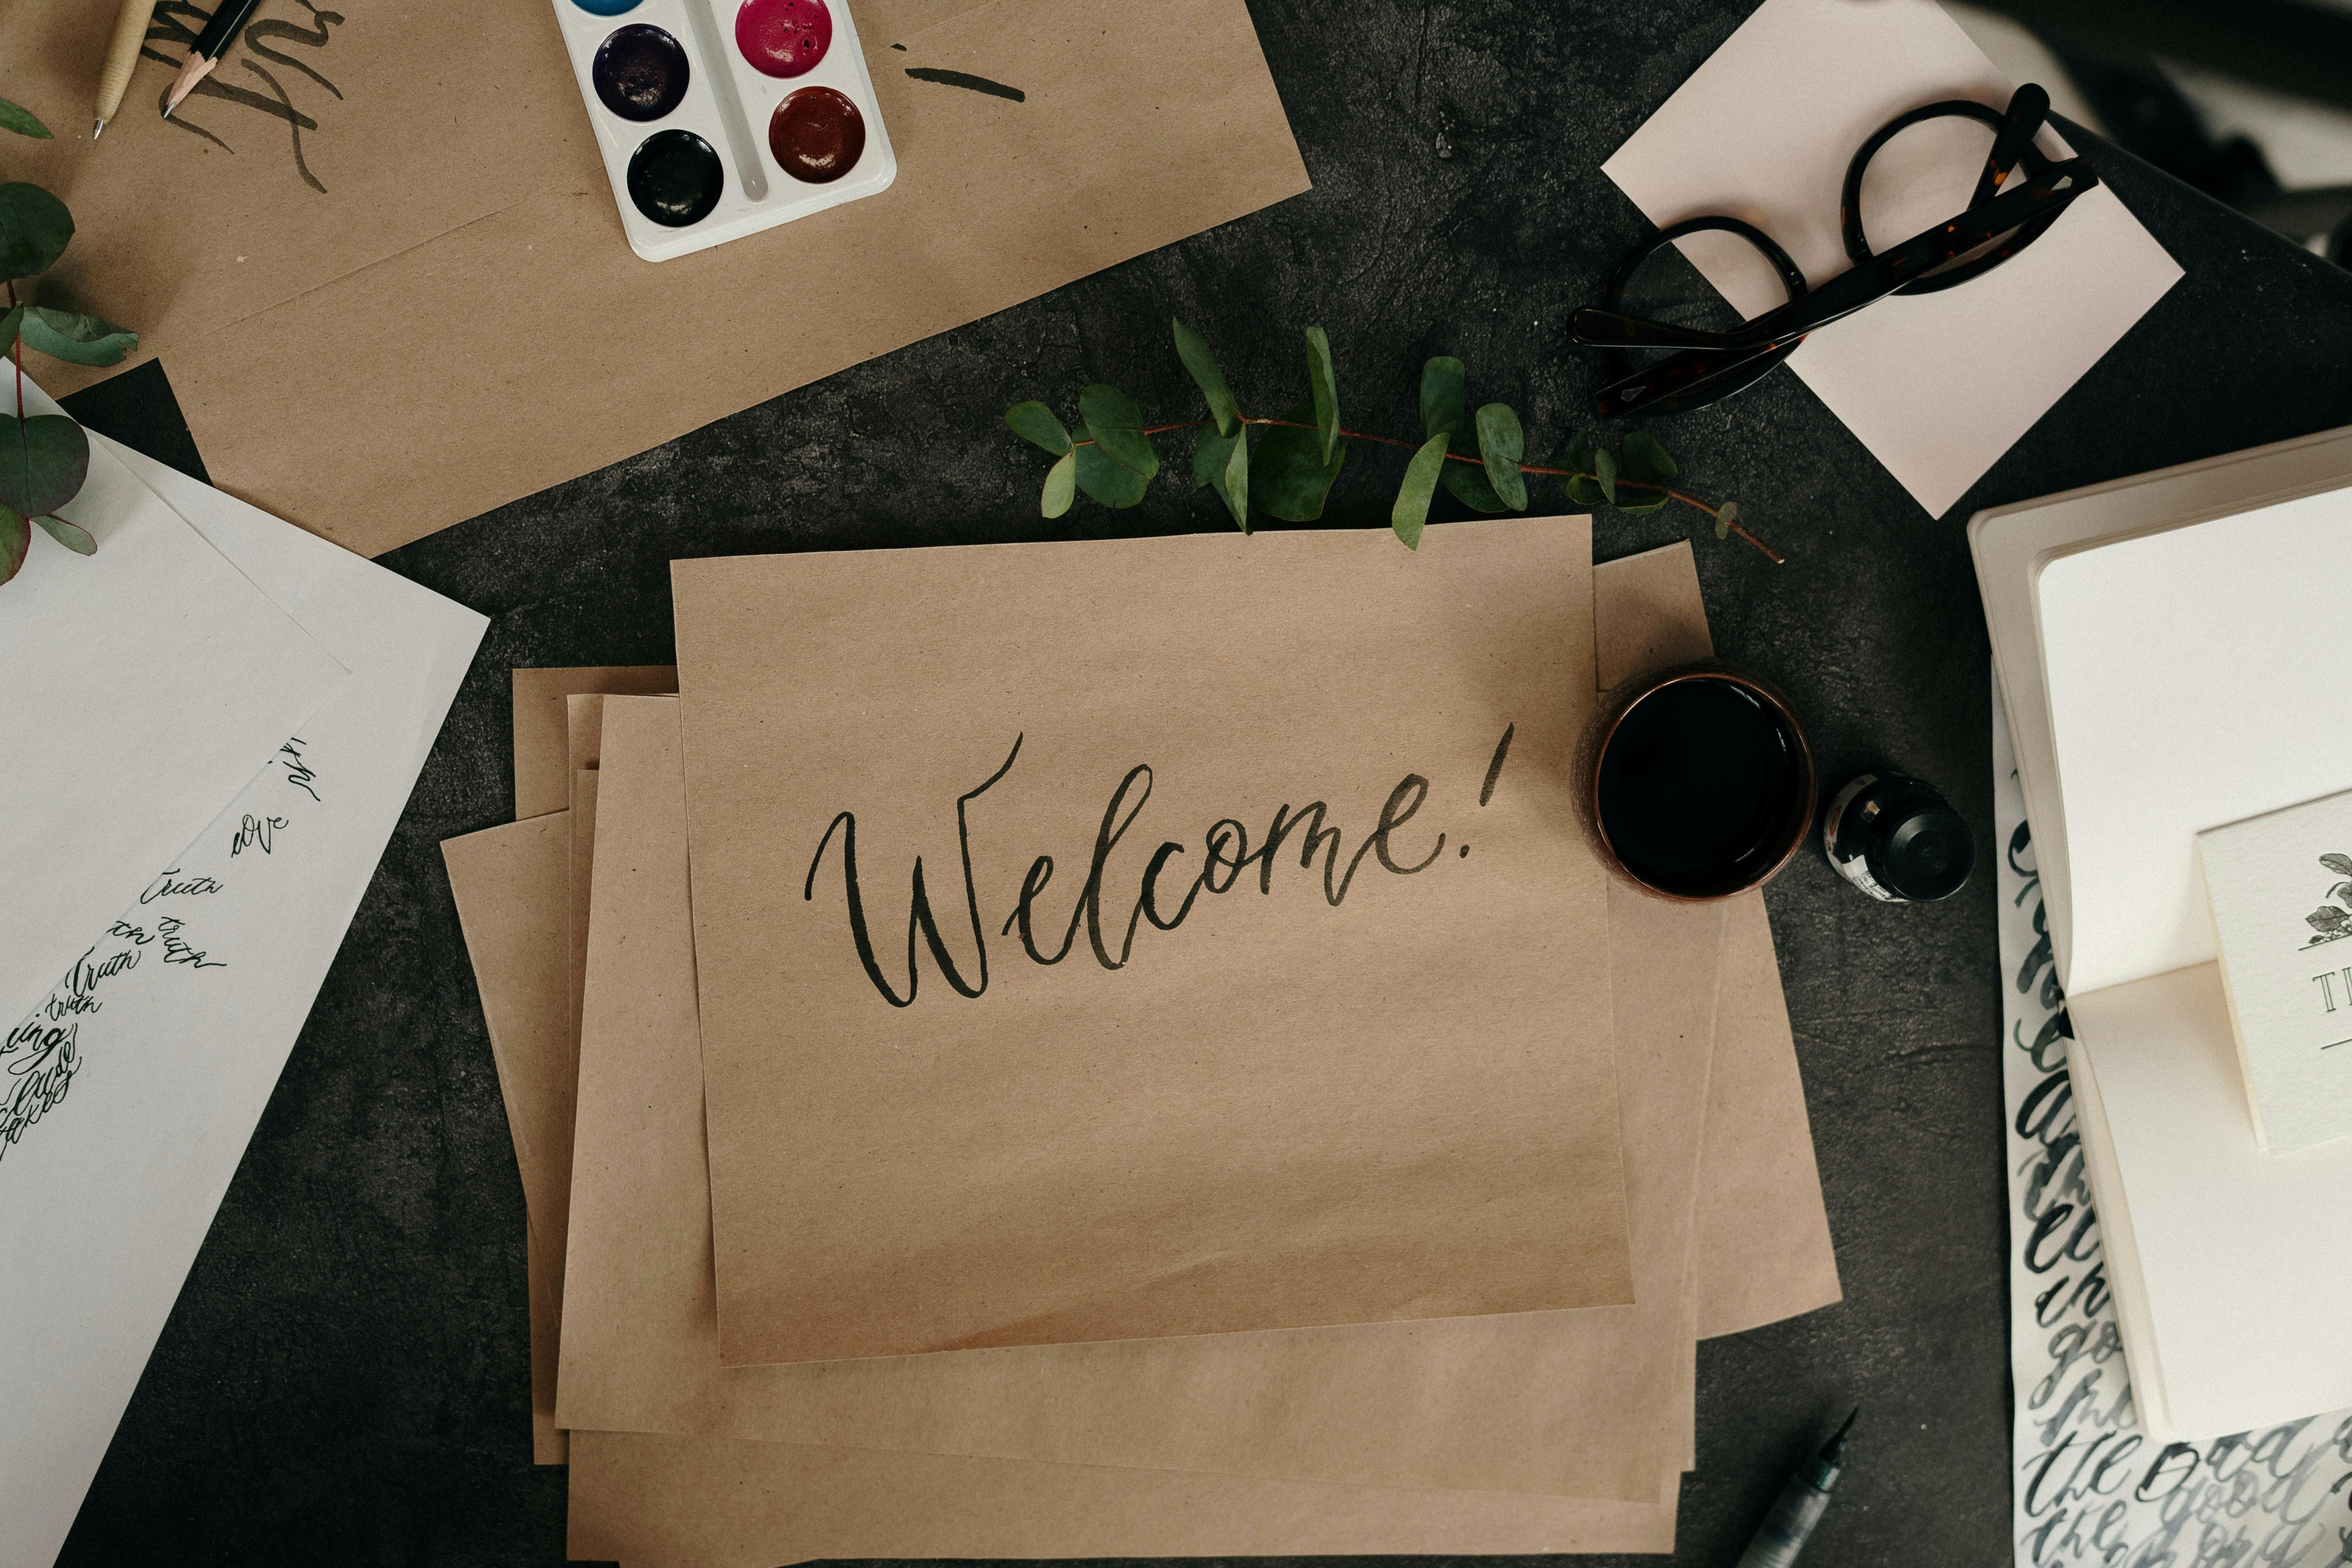 Stack of paper and paints on a table, one piece of paper has the word "Welcome" written on it.